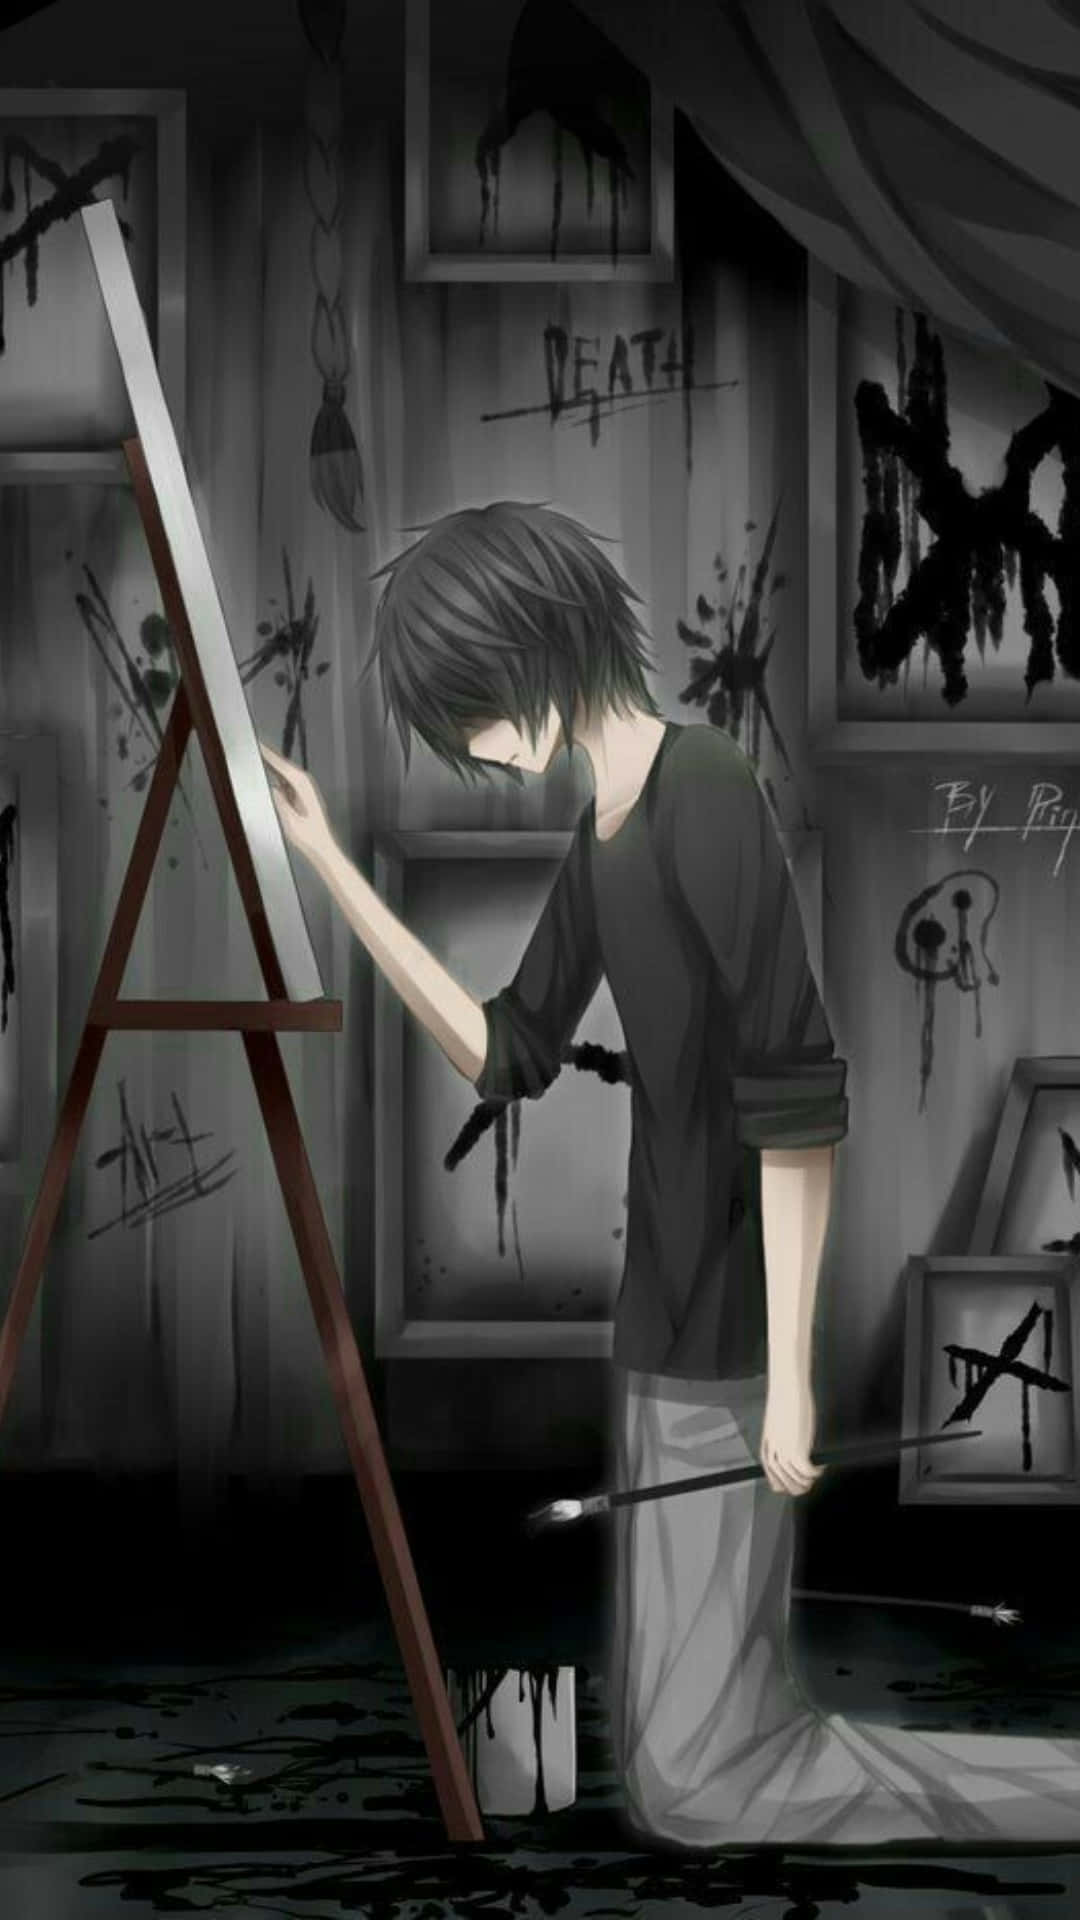 Sad Anime Wallpapers - Alone Wallpaper for Android - Download | Cafe Bazaar